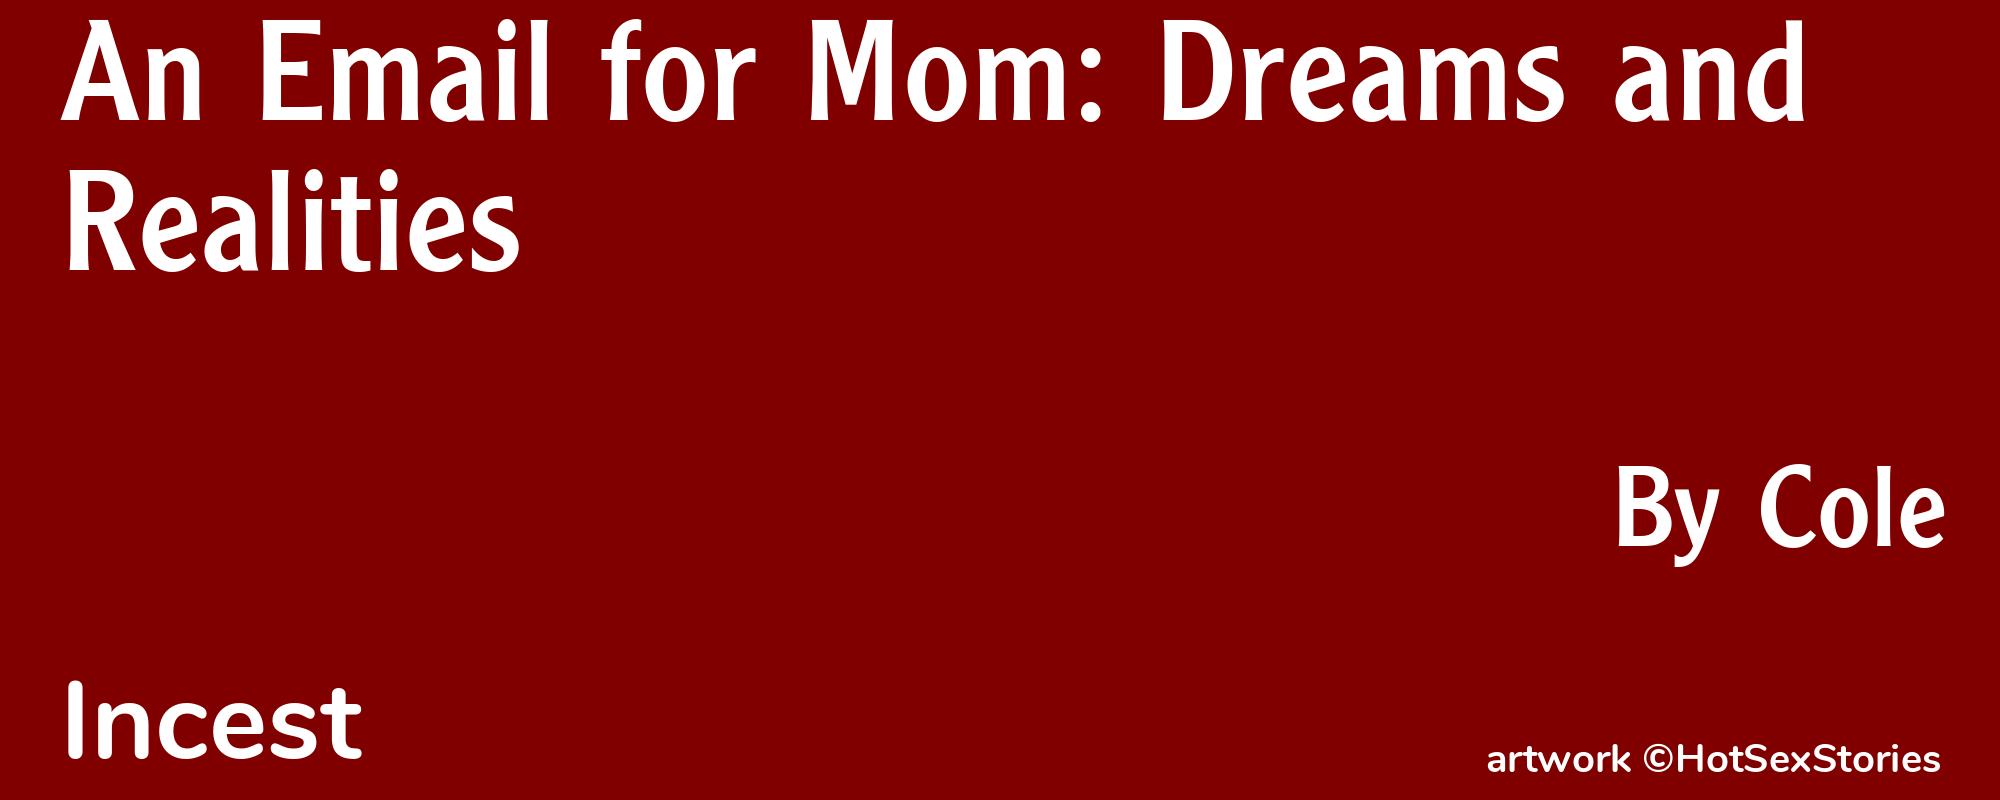 An Email for Mom: Dreams and Realities - Cover